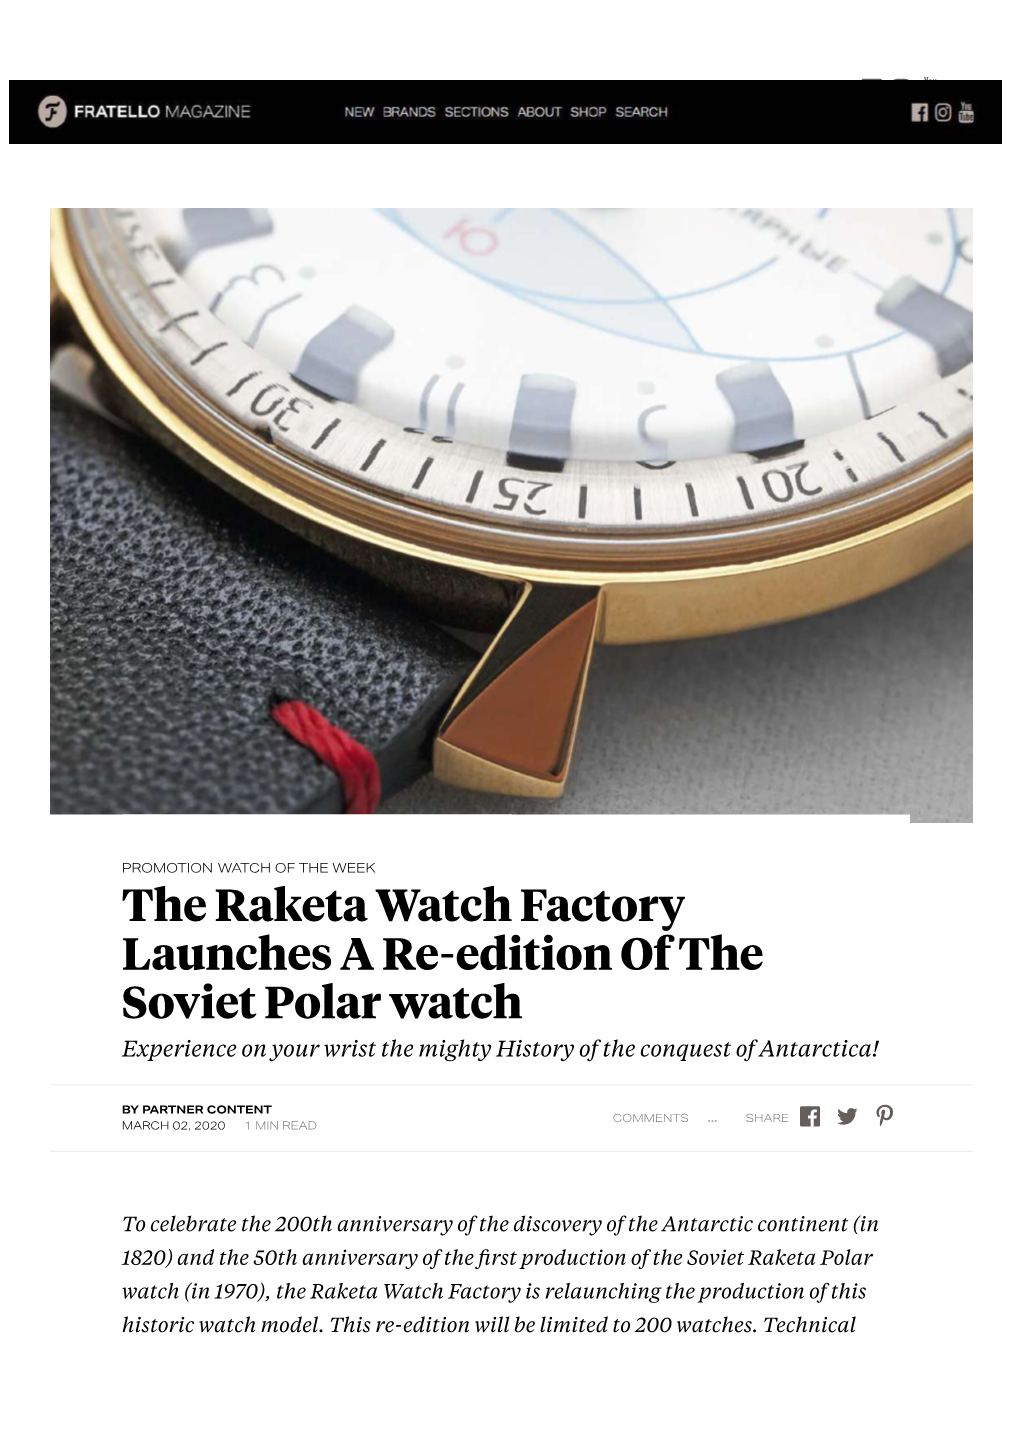 The Raketa Watch Factory Launches a Re-Edition of the Soviet Polar Watch